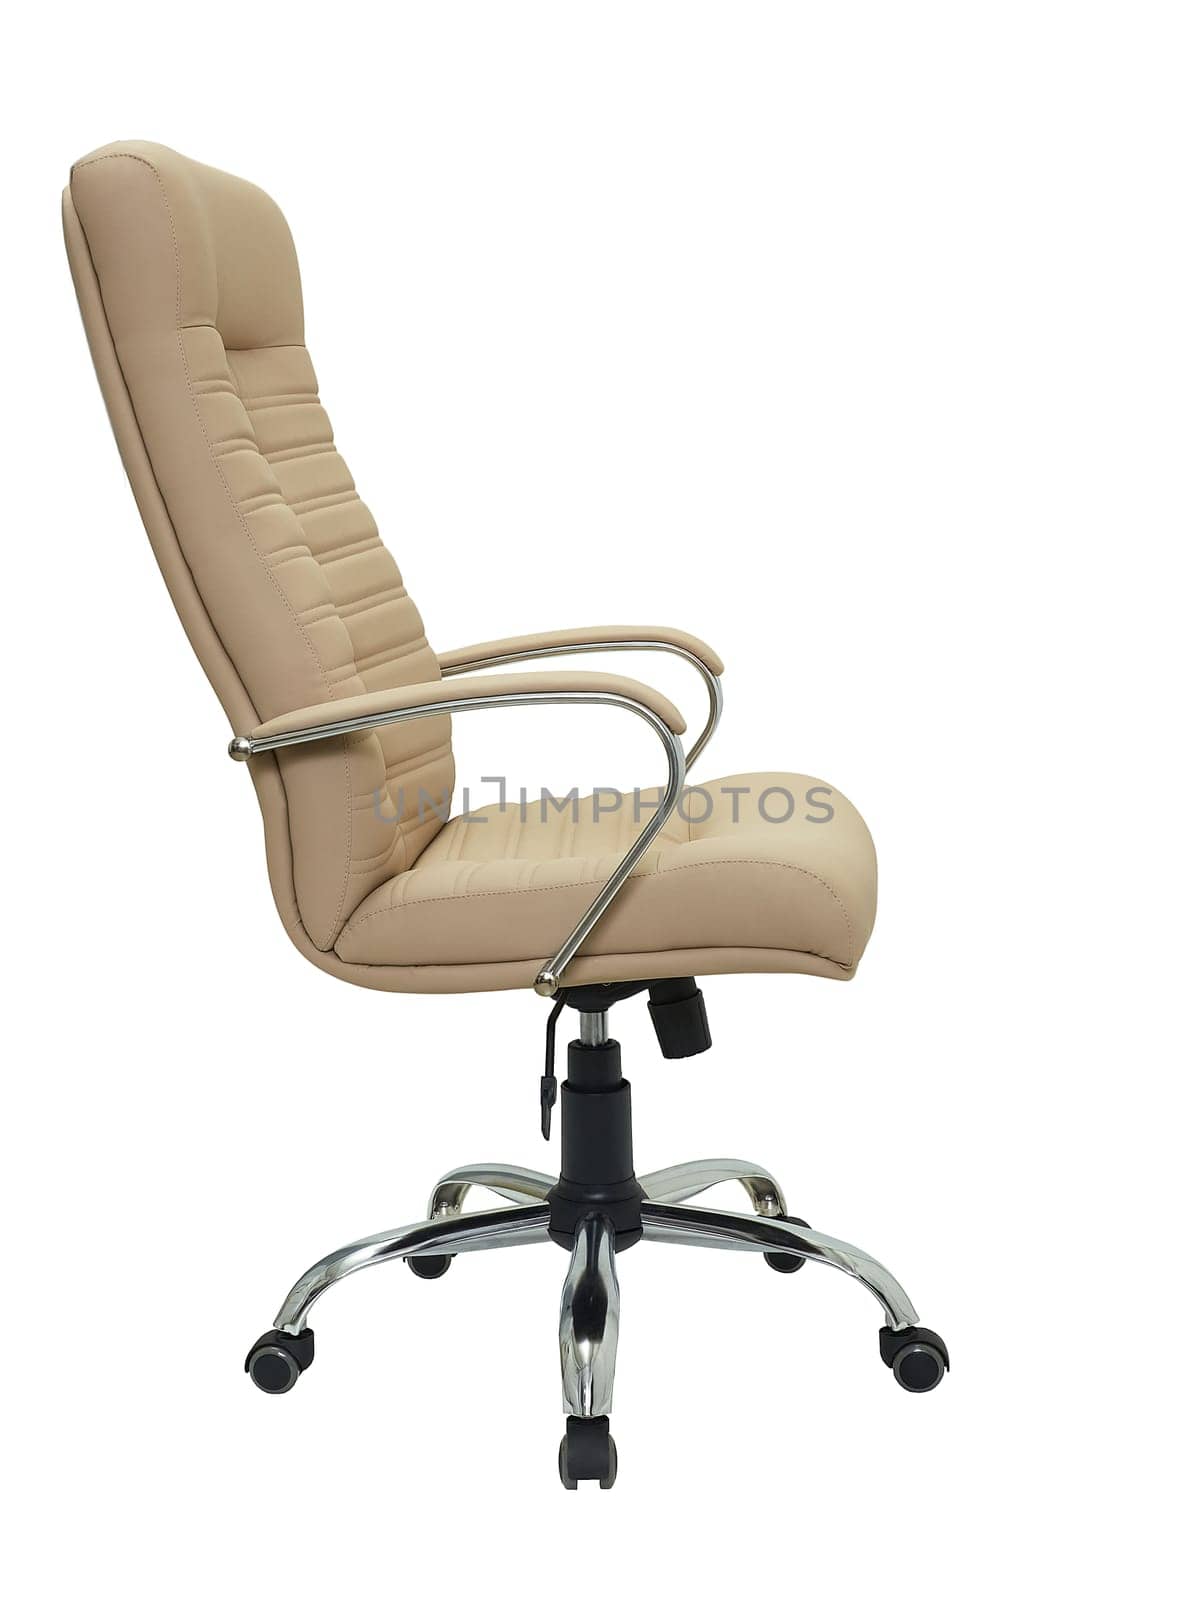 beige office armchair on wheels isolated on white background, side view. furniture in minimal style